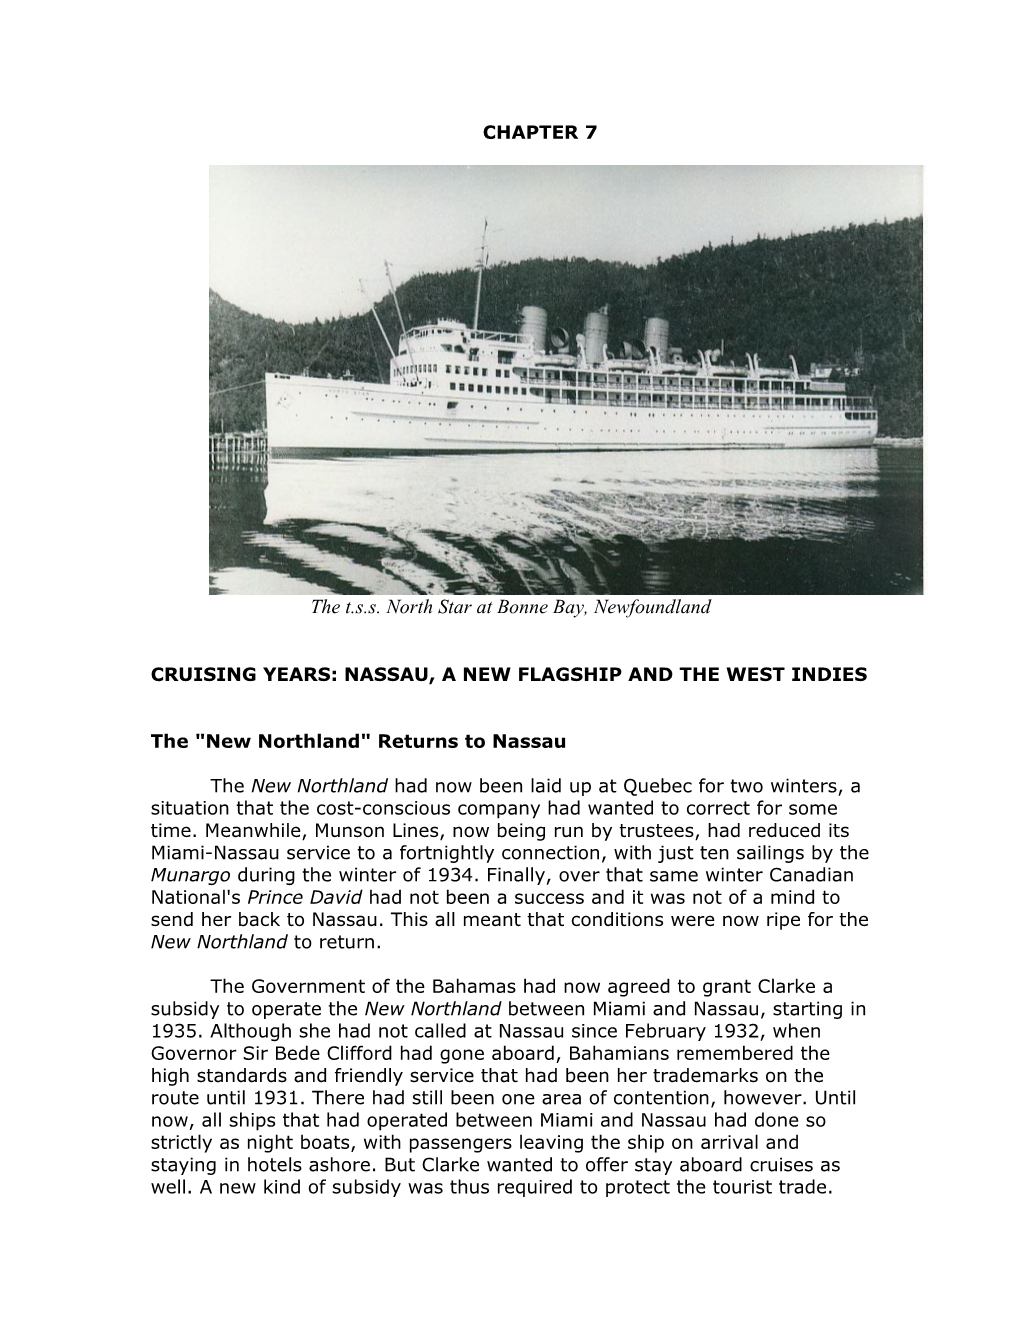 The T.S.S. North Star at Bonne Bay, Newfoundland